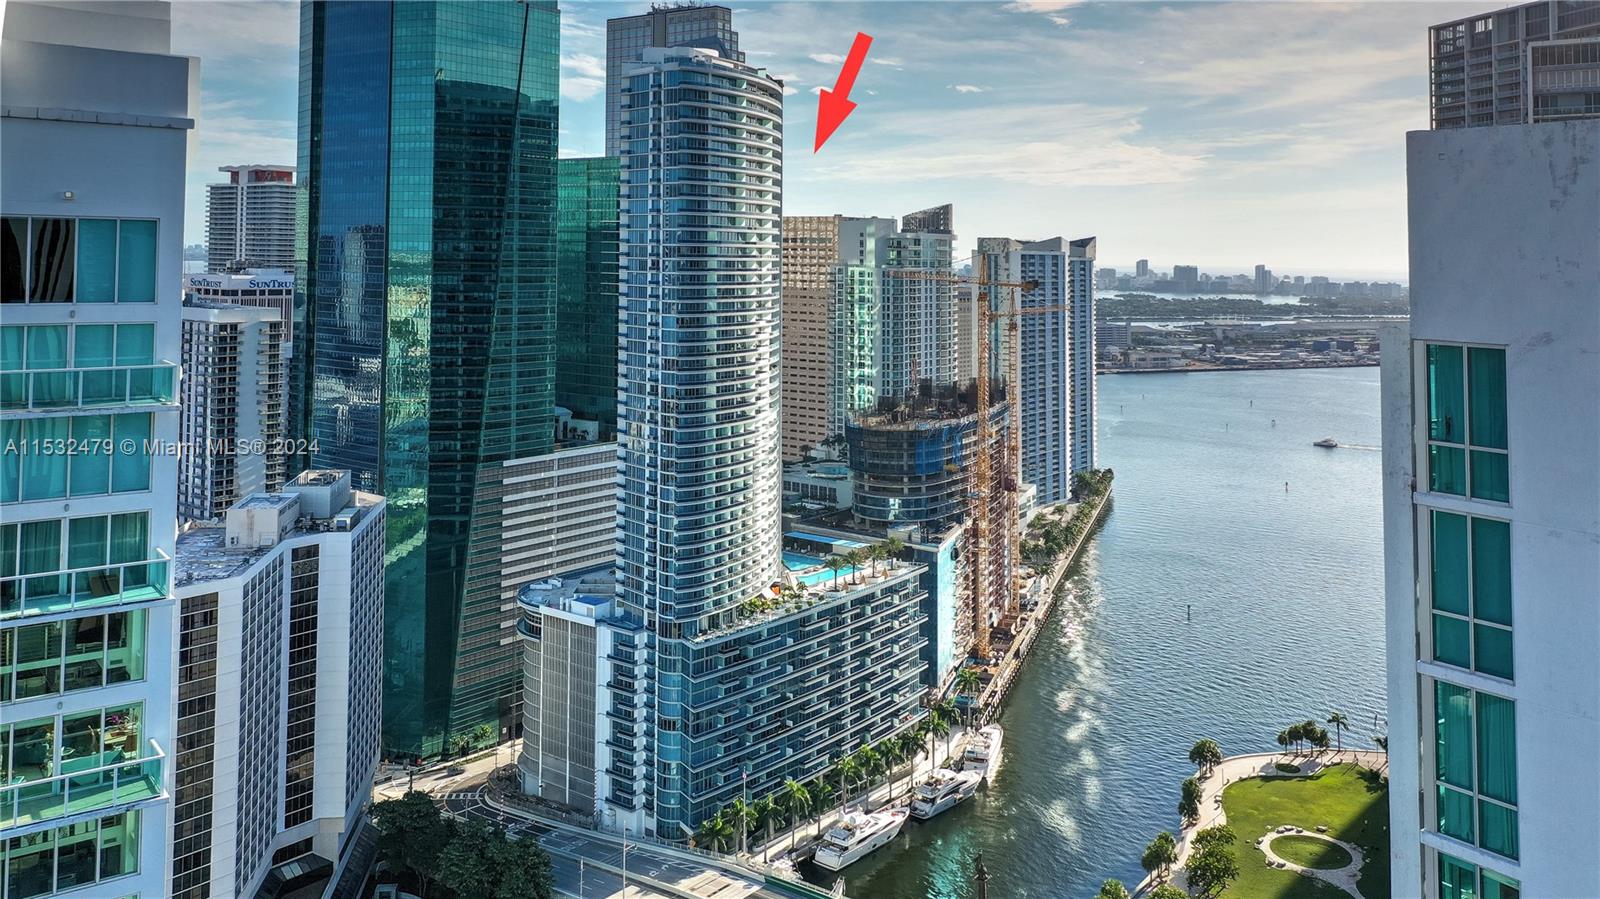 Exclusive Modern Lower Penthouse at Epic Condo, Downtown Miami. 2bed/ 2bath/ 1 half bath. top-notch finishes, 48x48 Marble Floor, Water and City views, sub-zero appliances, oversized balconies and more, Prestigious Building home of ZUMA Restaurant, pool, 5 start spa/yoga/fitness center. Walking distances to Brickell, Bayside, Novikov, Hell Kitchen, Whole food, Silver Spot Cinema nearby.